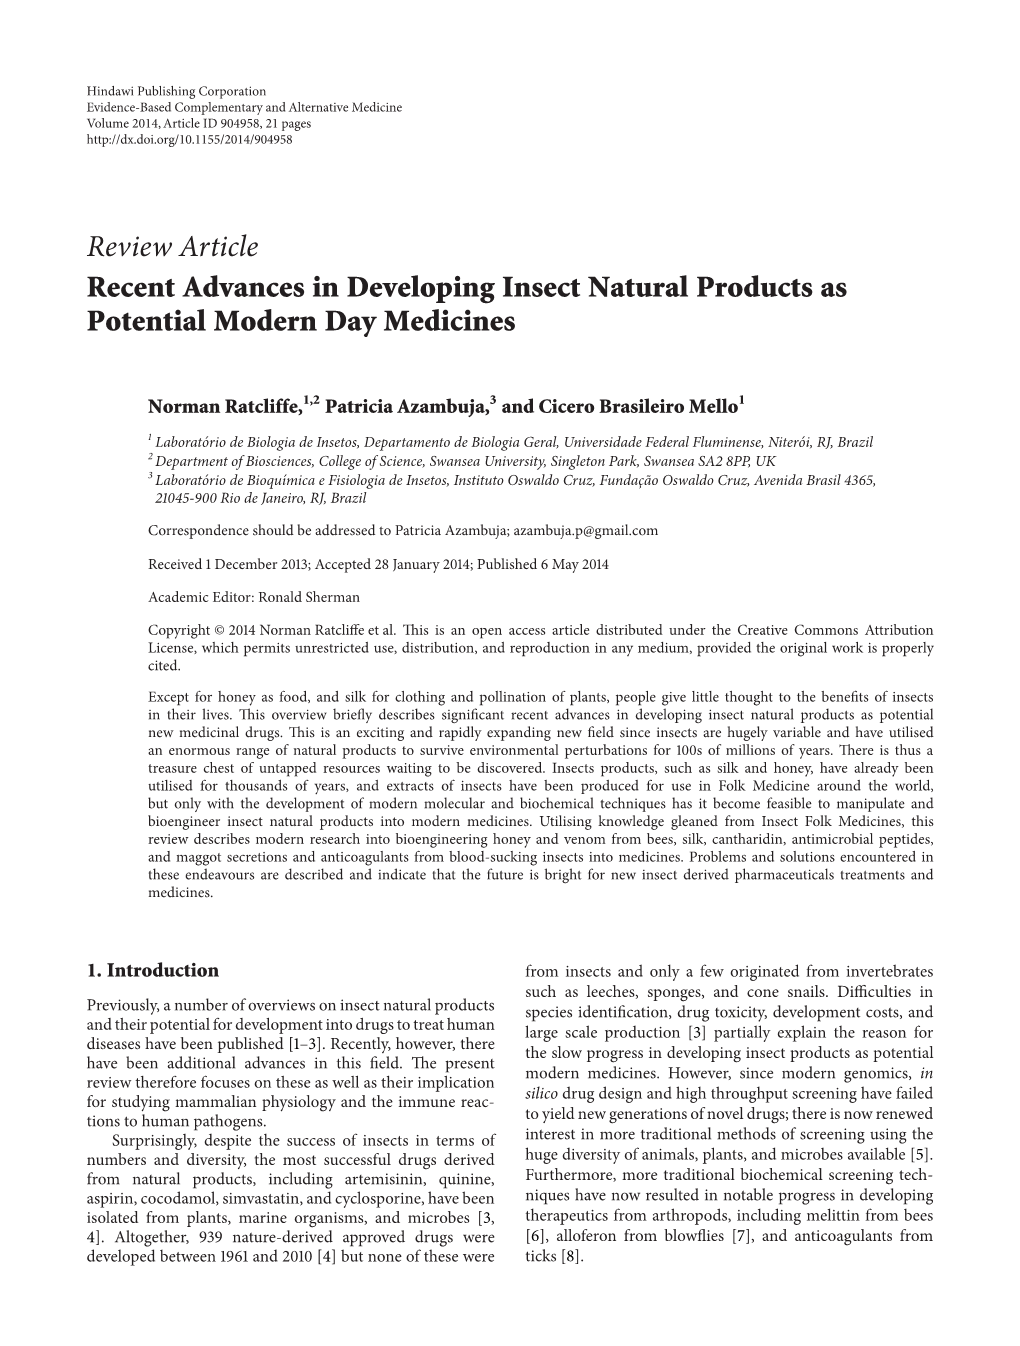 Recent Advances in Developing Insect Natural Products As Potential Modern Day Medicines